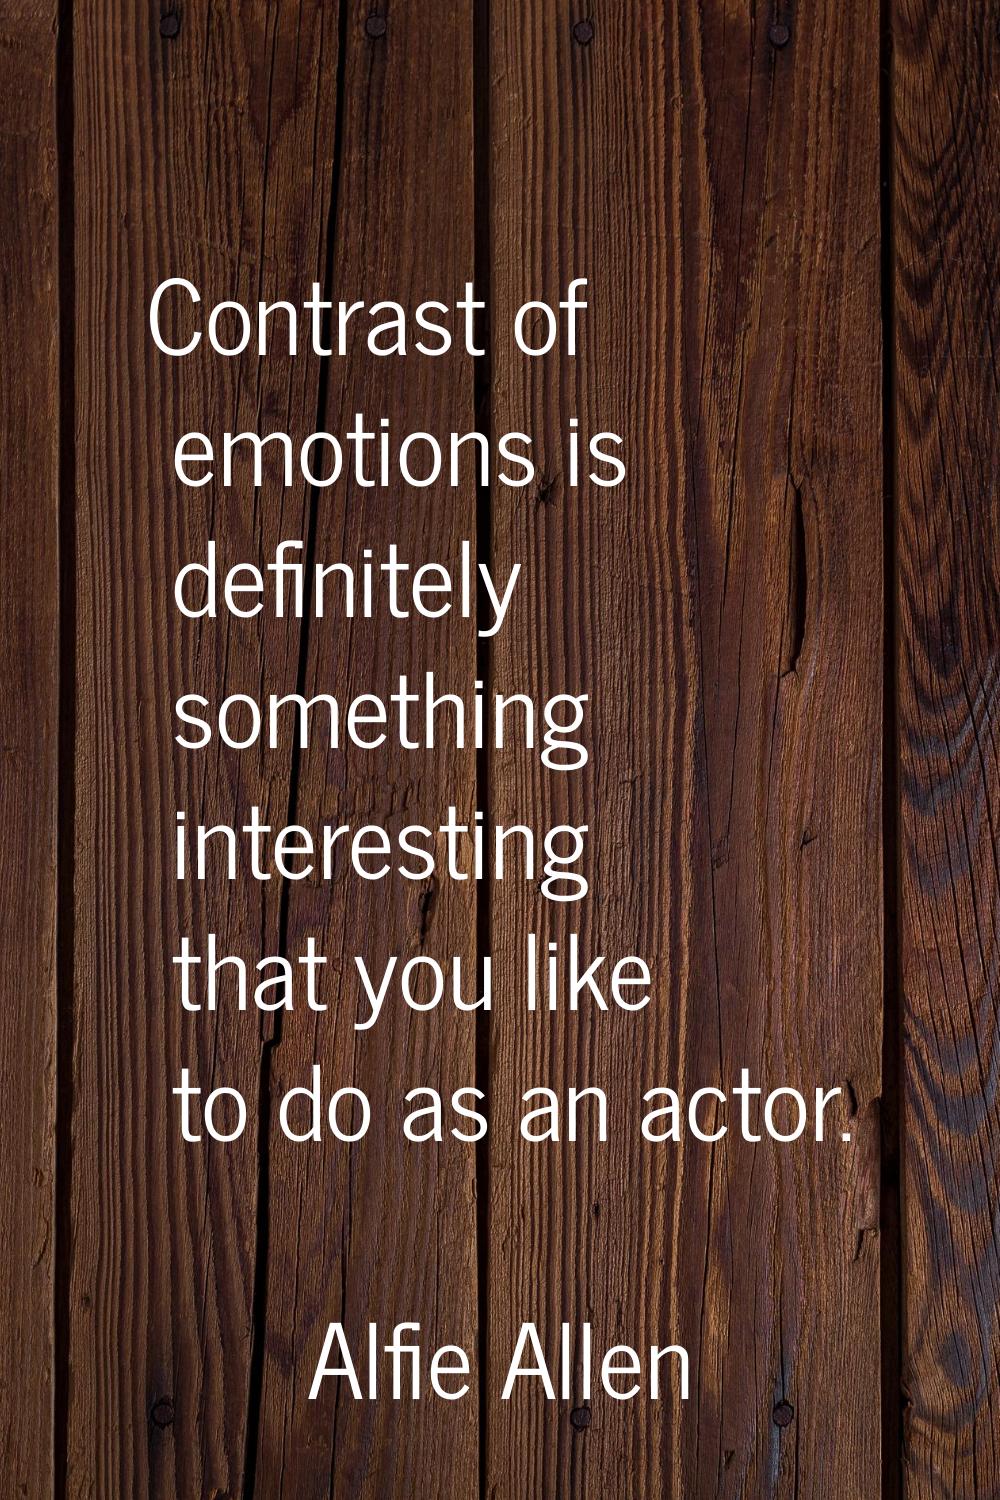 Contrast of emotions is definitely something interesting that you like to do as an actor.